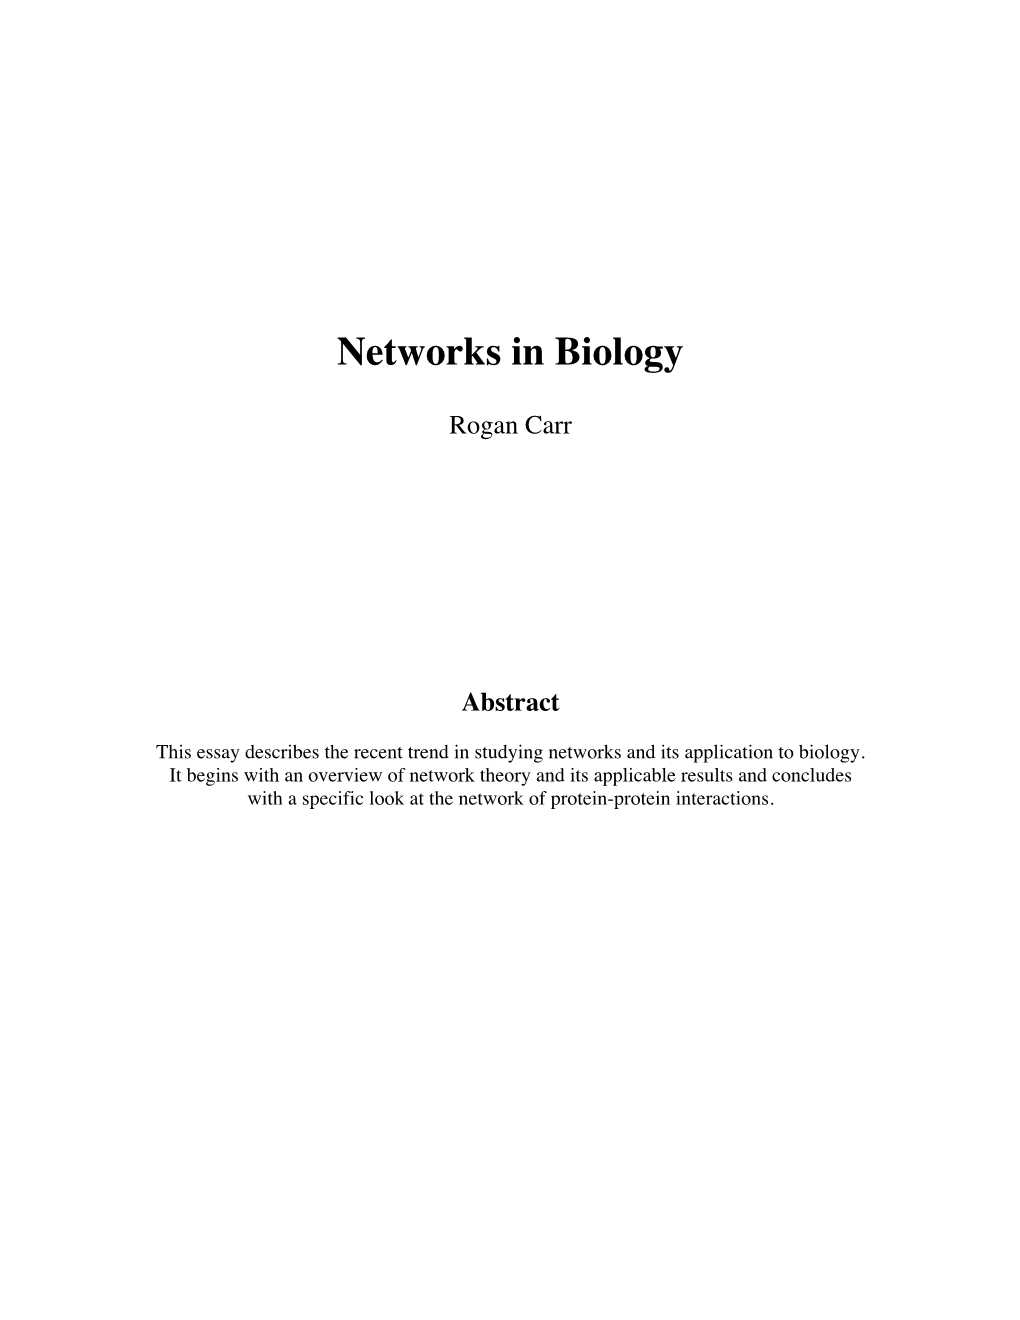 Networks in Biology